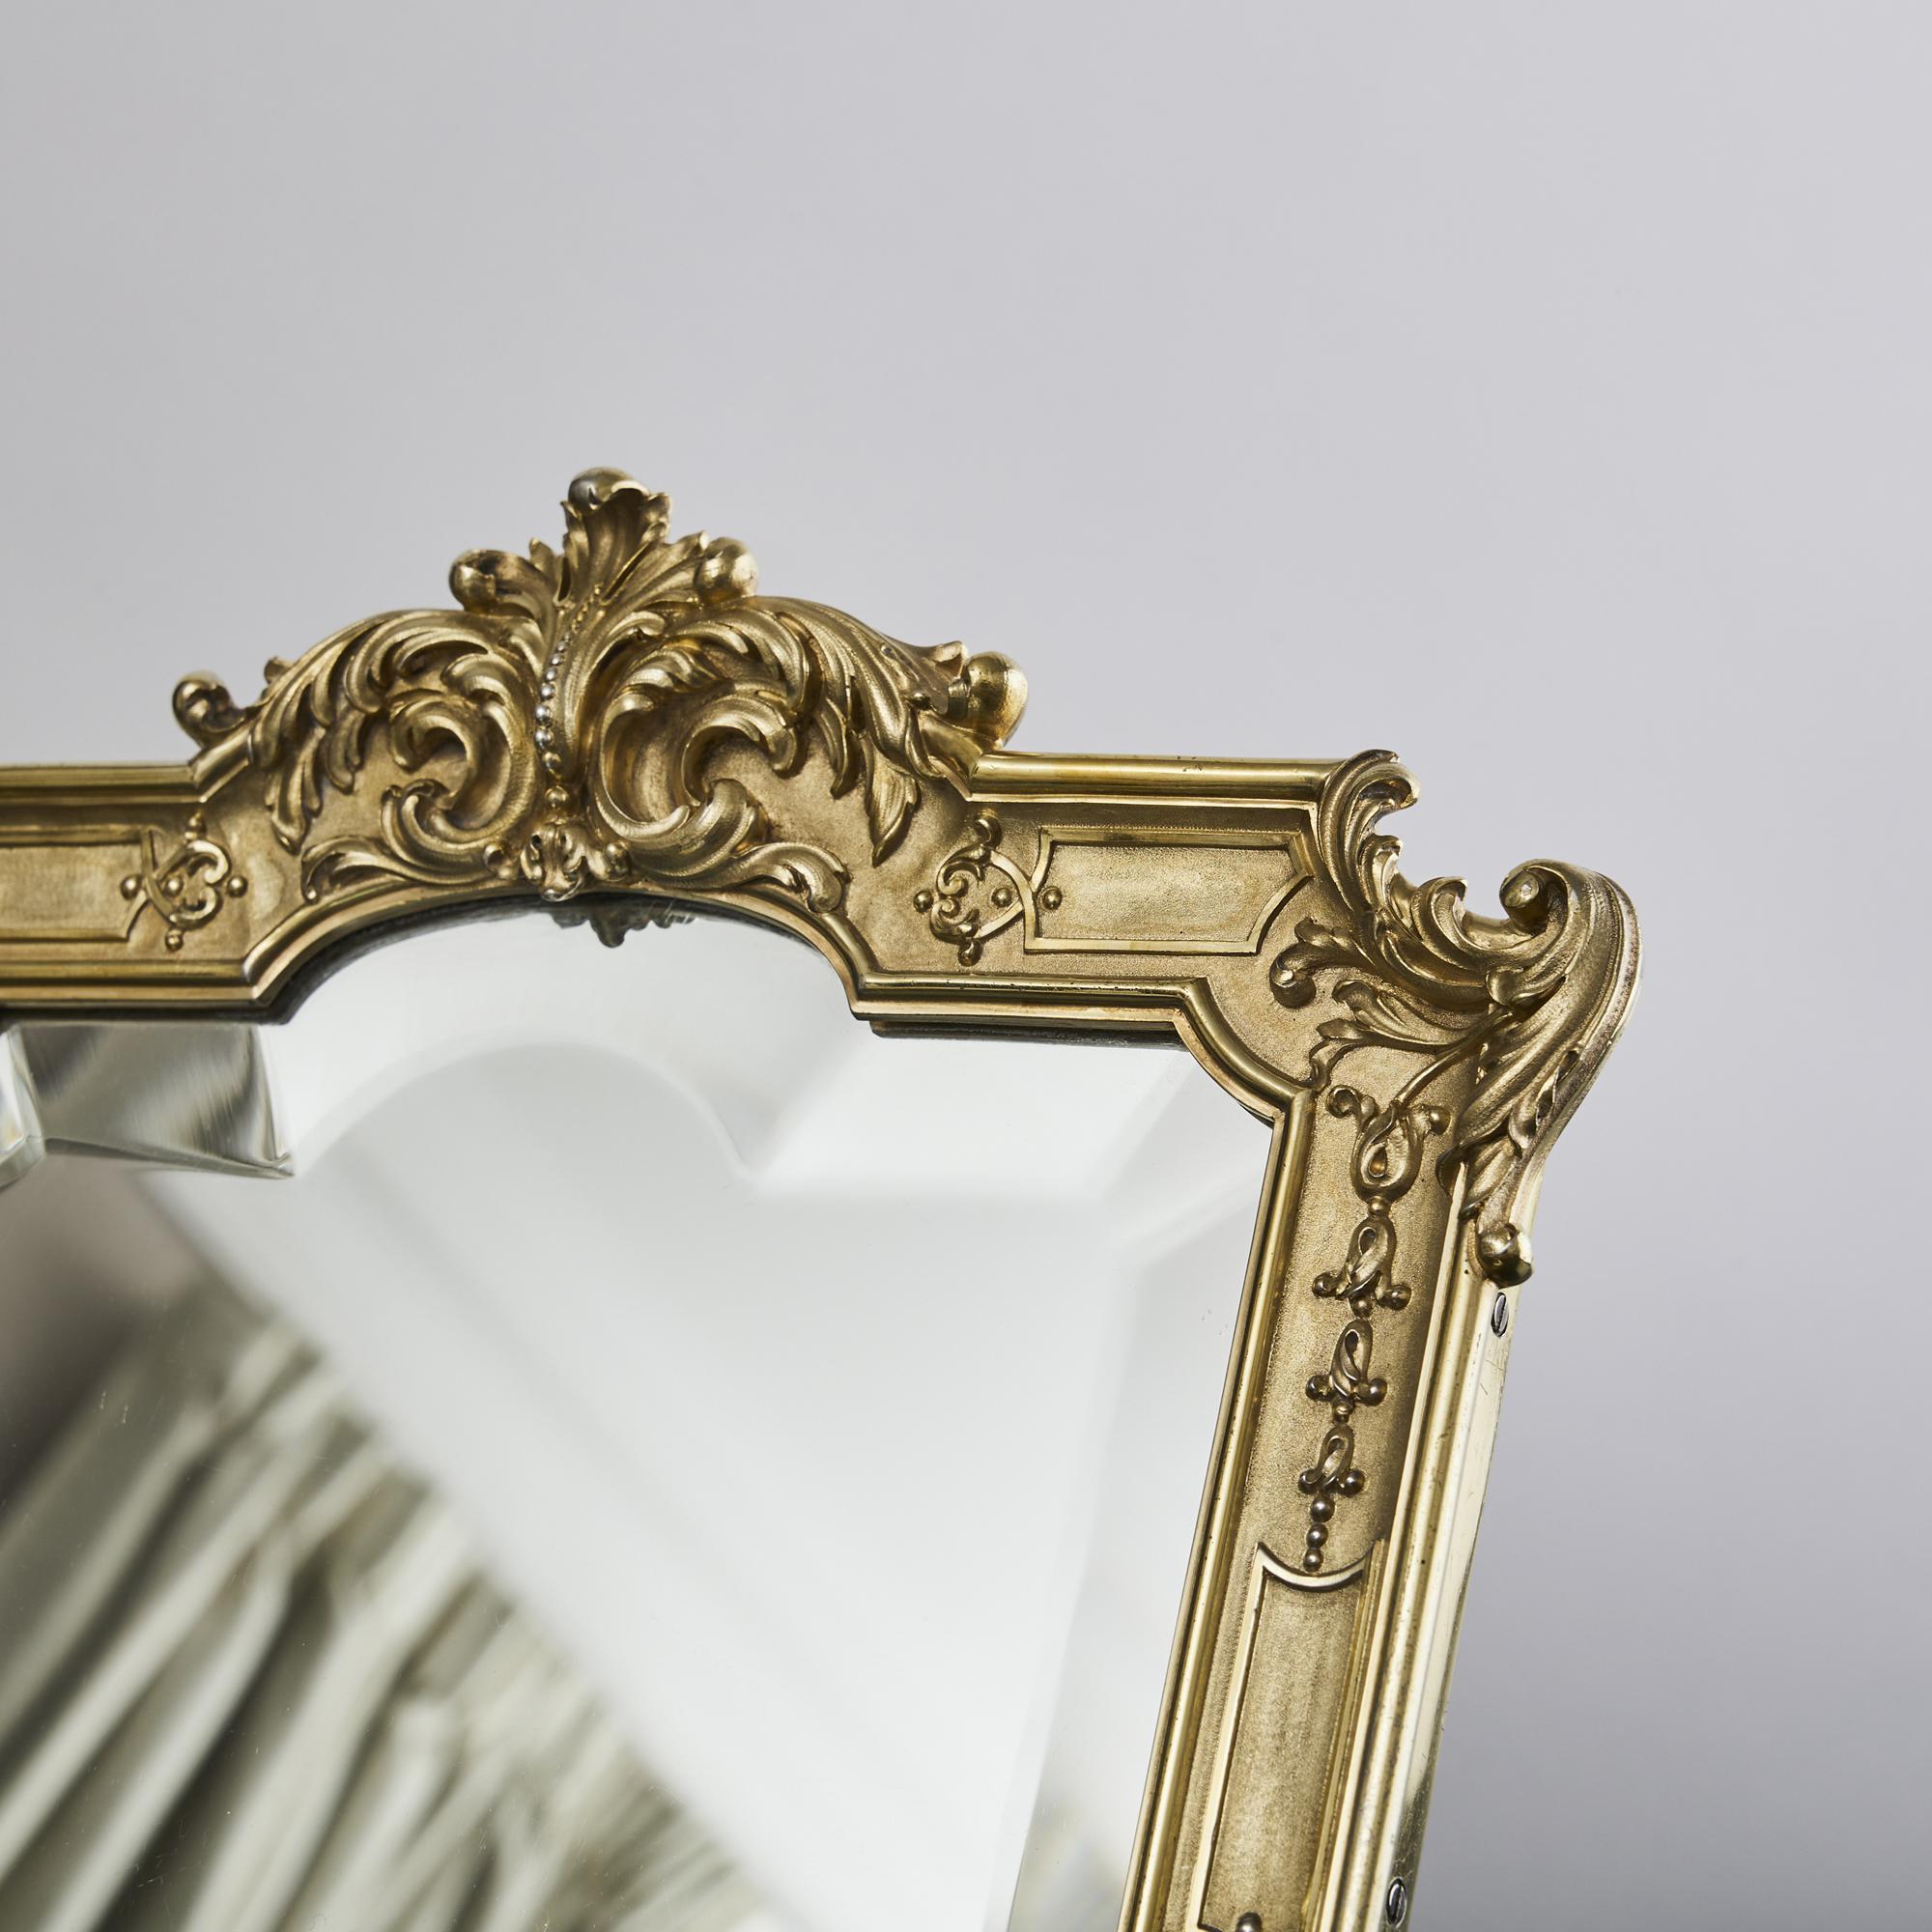 Cast, gilded and solid first standard French silver mirror frame of superb quality, beautifully made and of substantial weight. It was made at the end of the 19th century by Gustave Keller Frères, a high-end jeweller founded in Paris in 1856. The